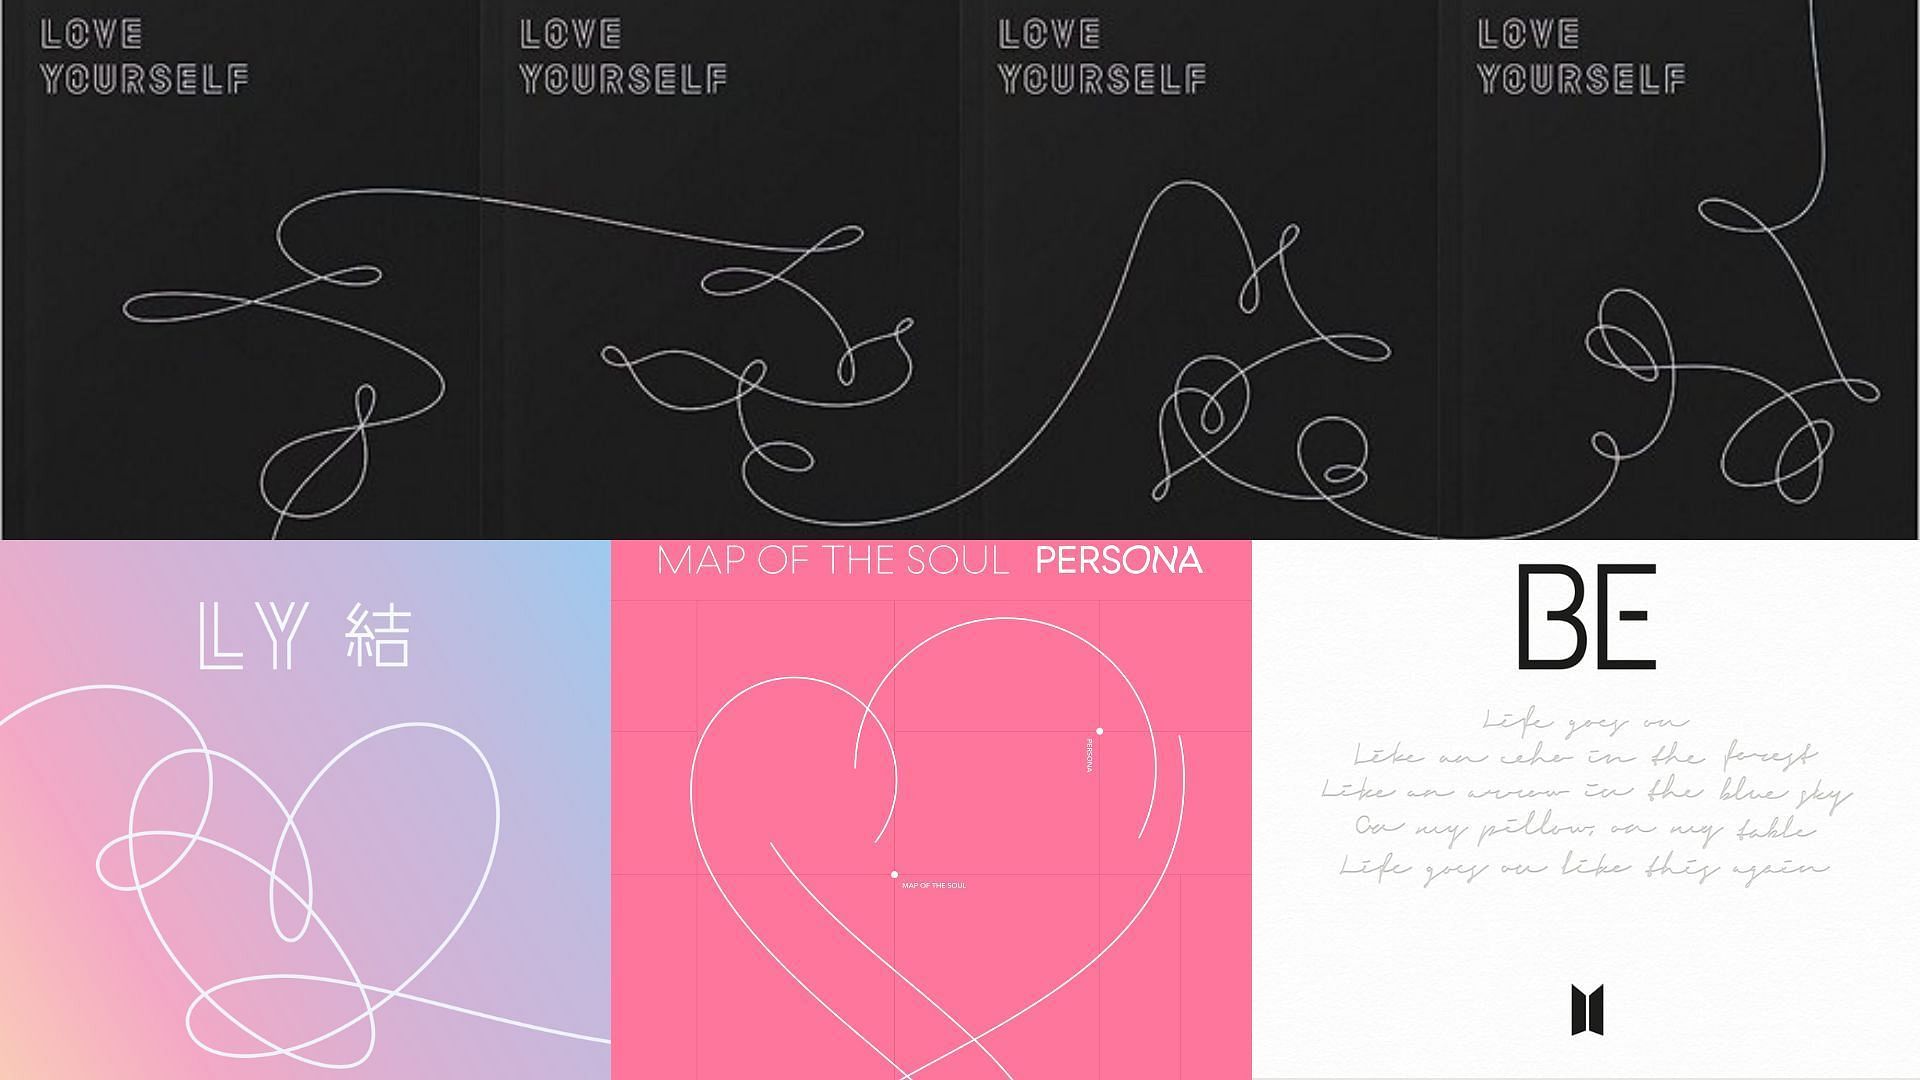 Love Yourself: Tear, Love Yourself: Answer, Map of the Soul: Persona, and BE album covers (Images via @BIGHIT_MUSIC/Twitter)